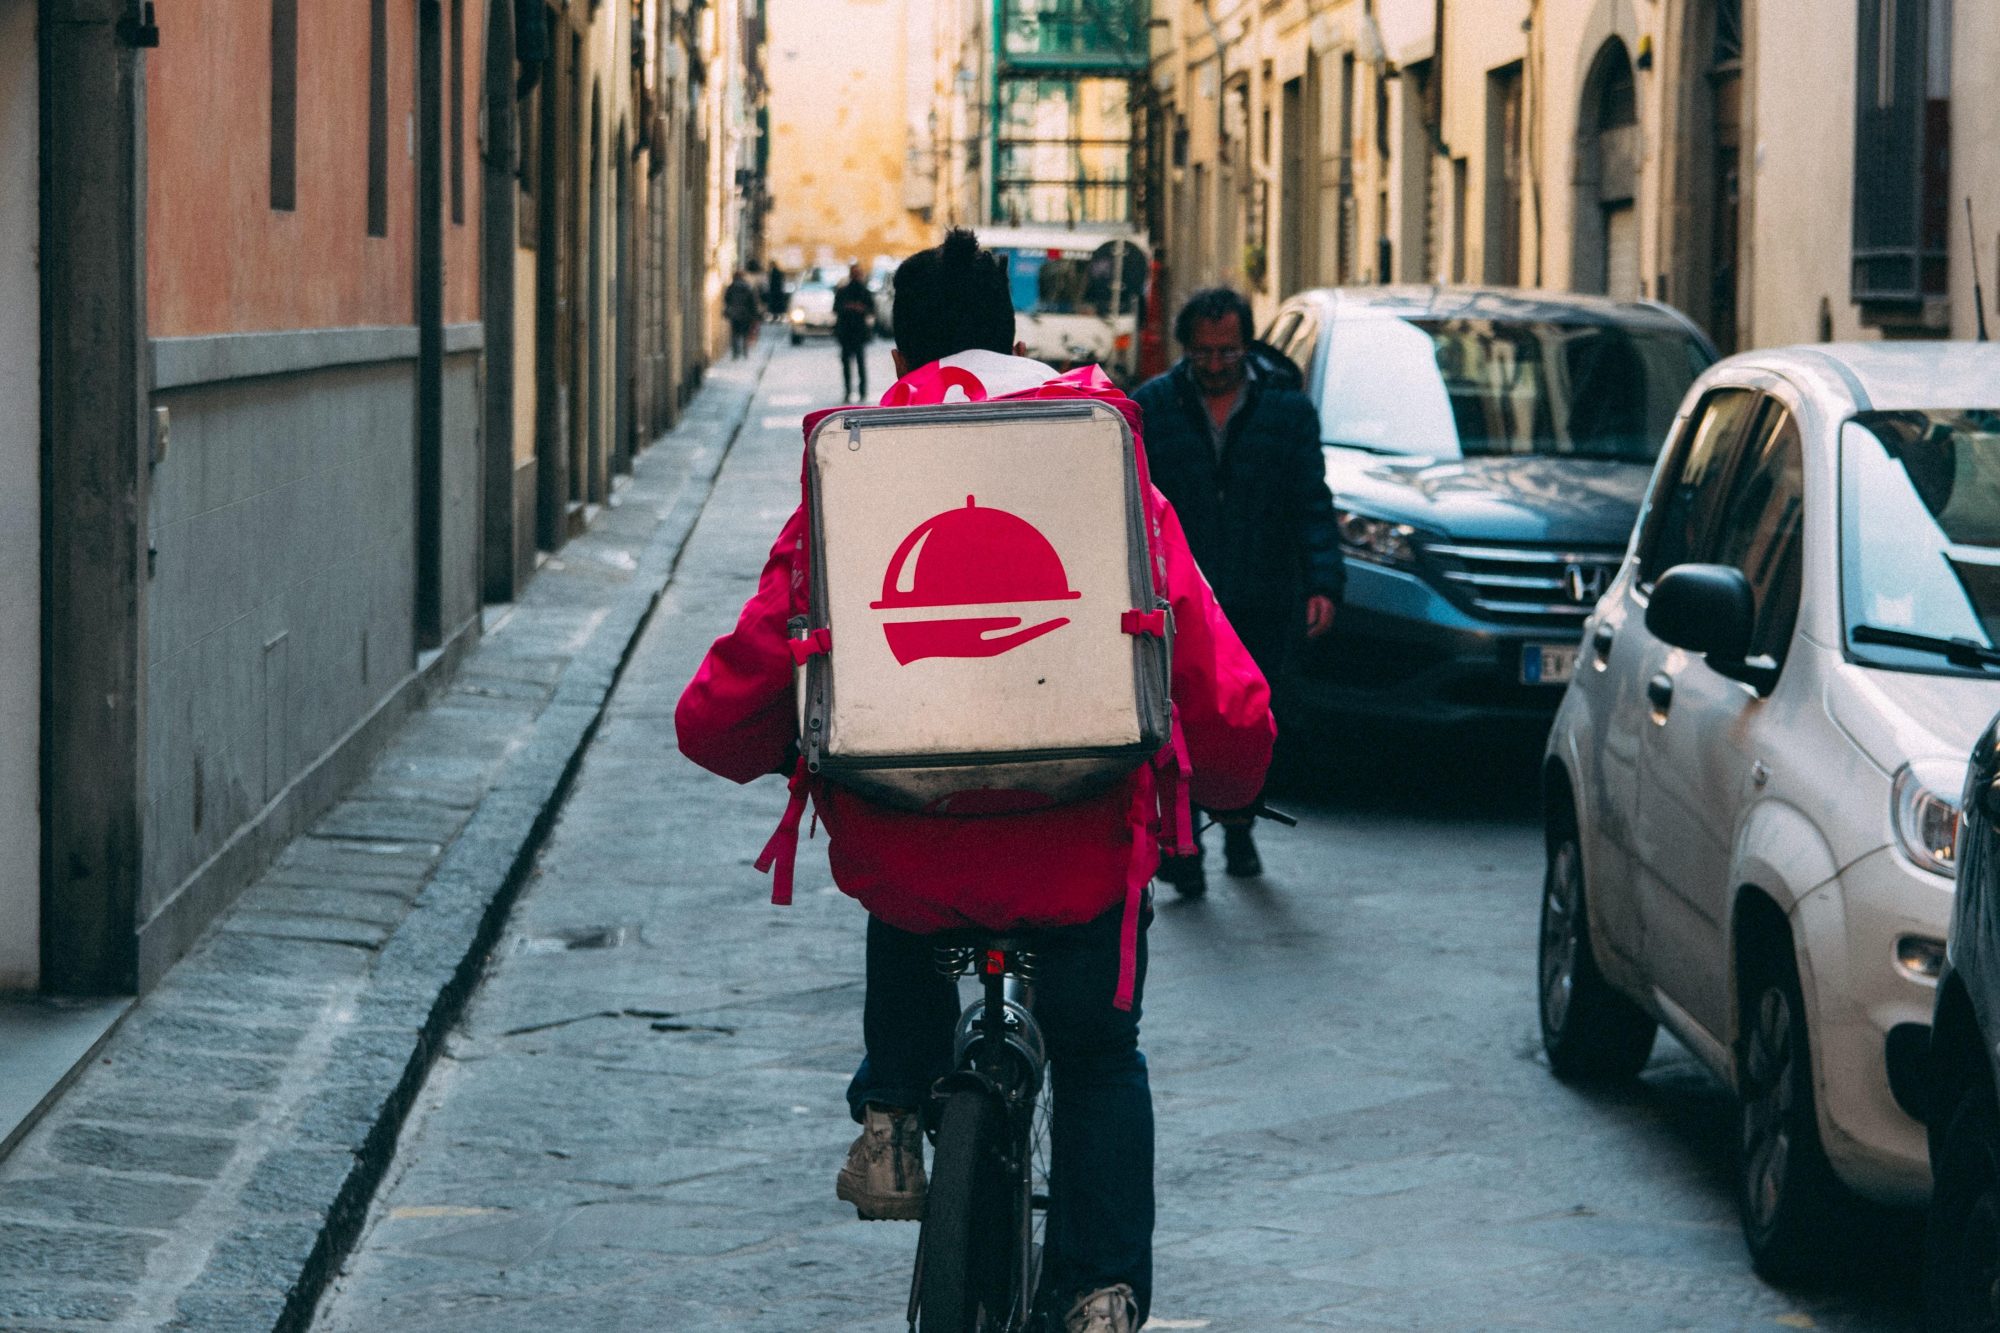 Food delivery is a fast-growing $200billion/yr sector
